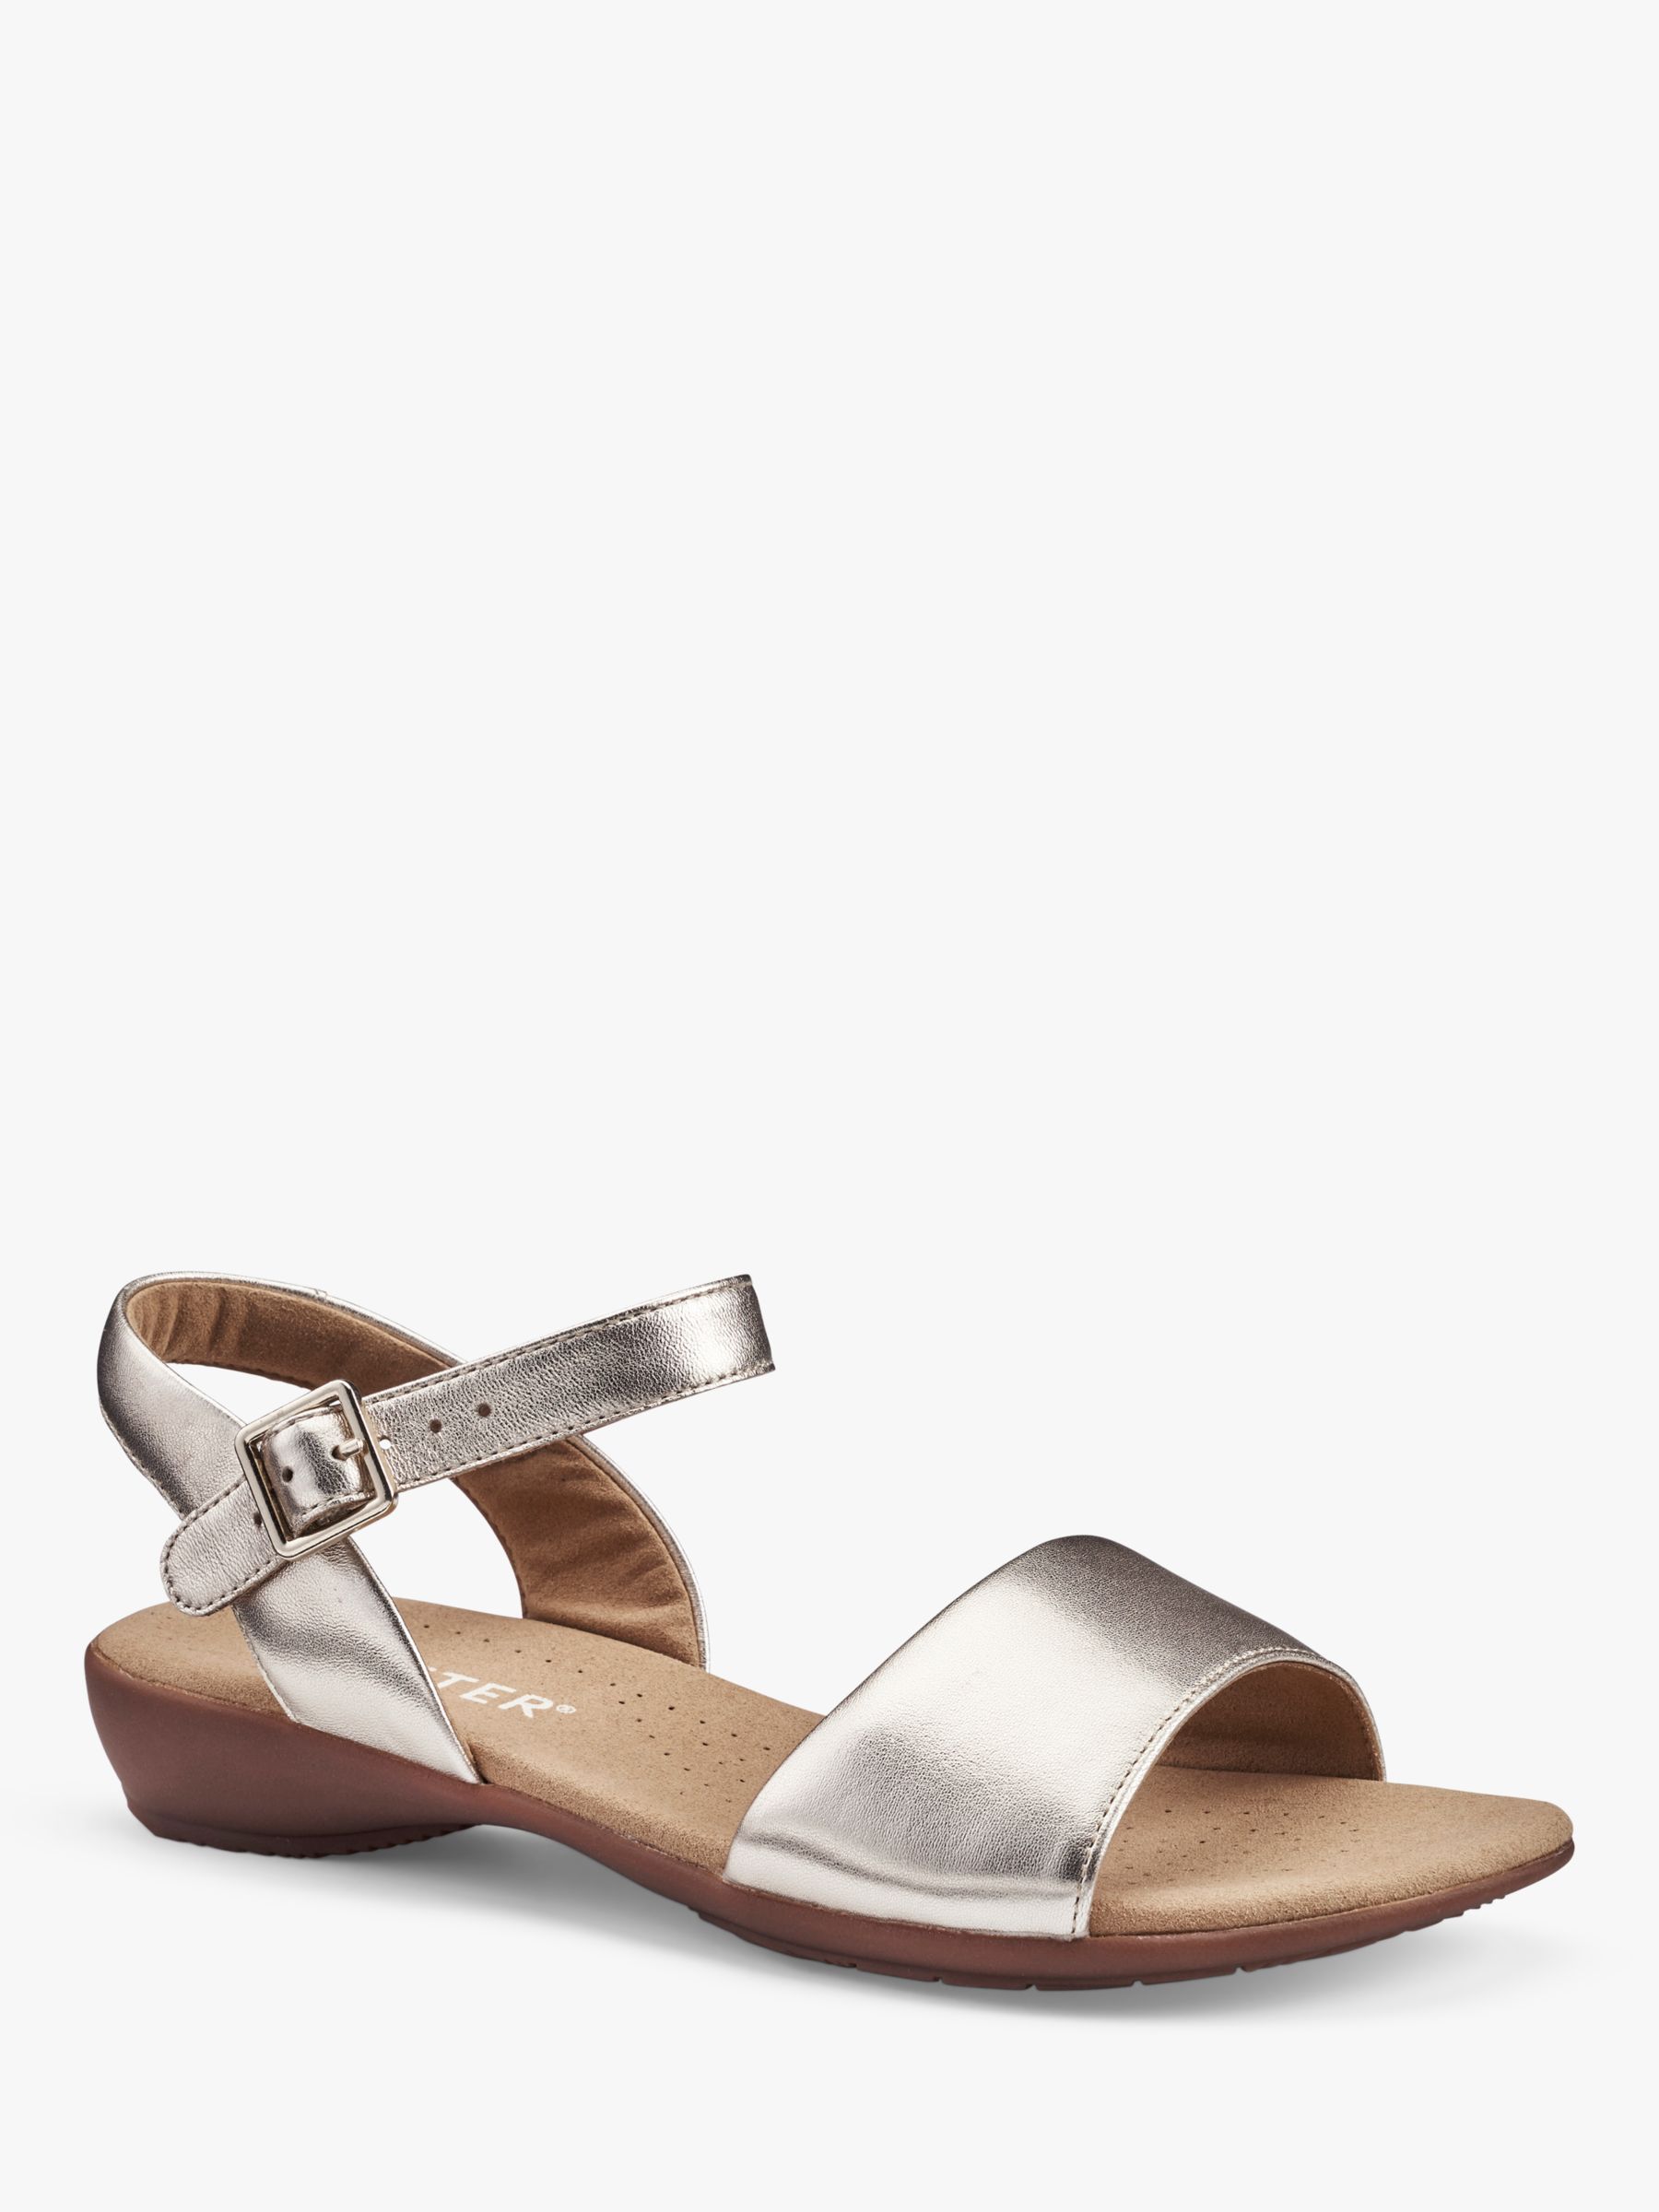 Buy Hotter Tropic Wide Fit Classic Leather Sandals Online at johnlewis.com